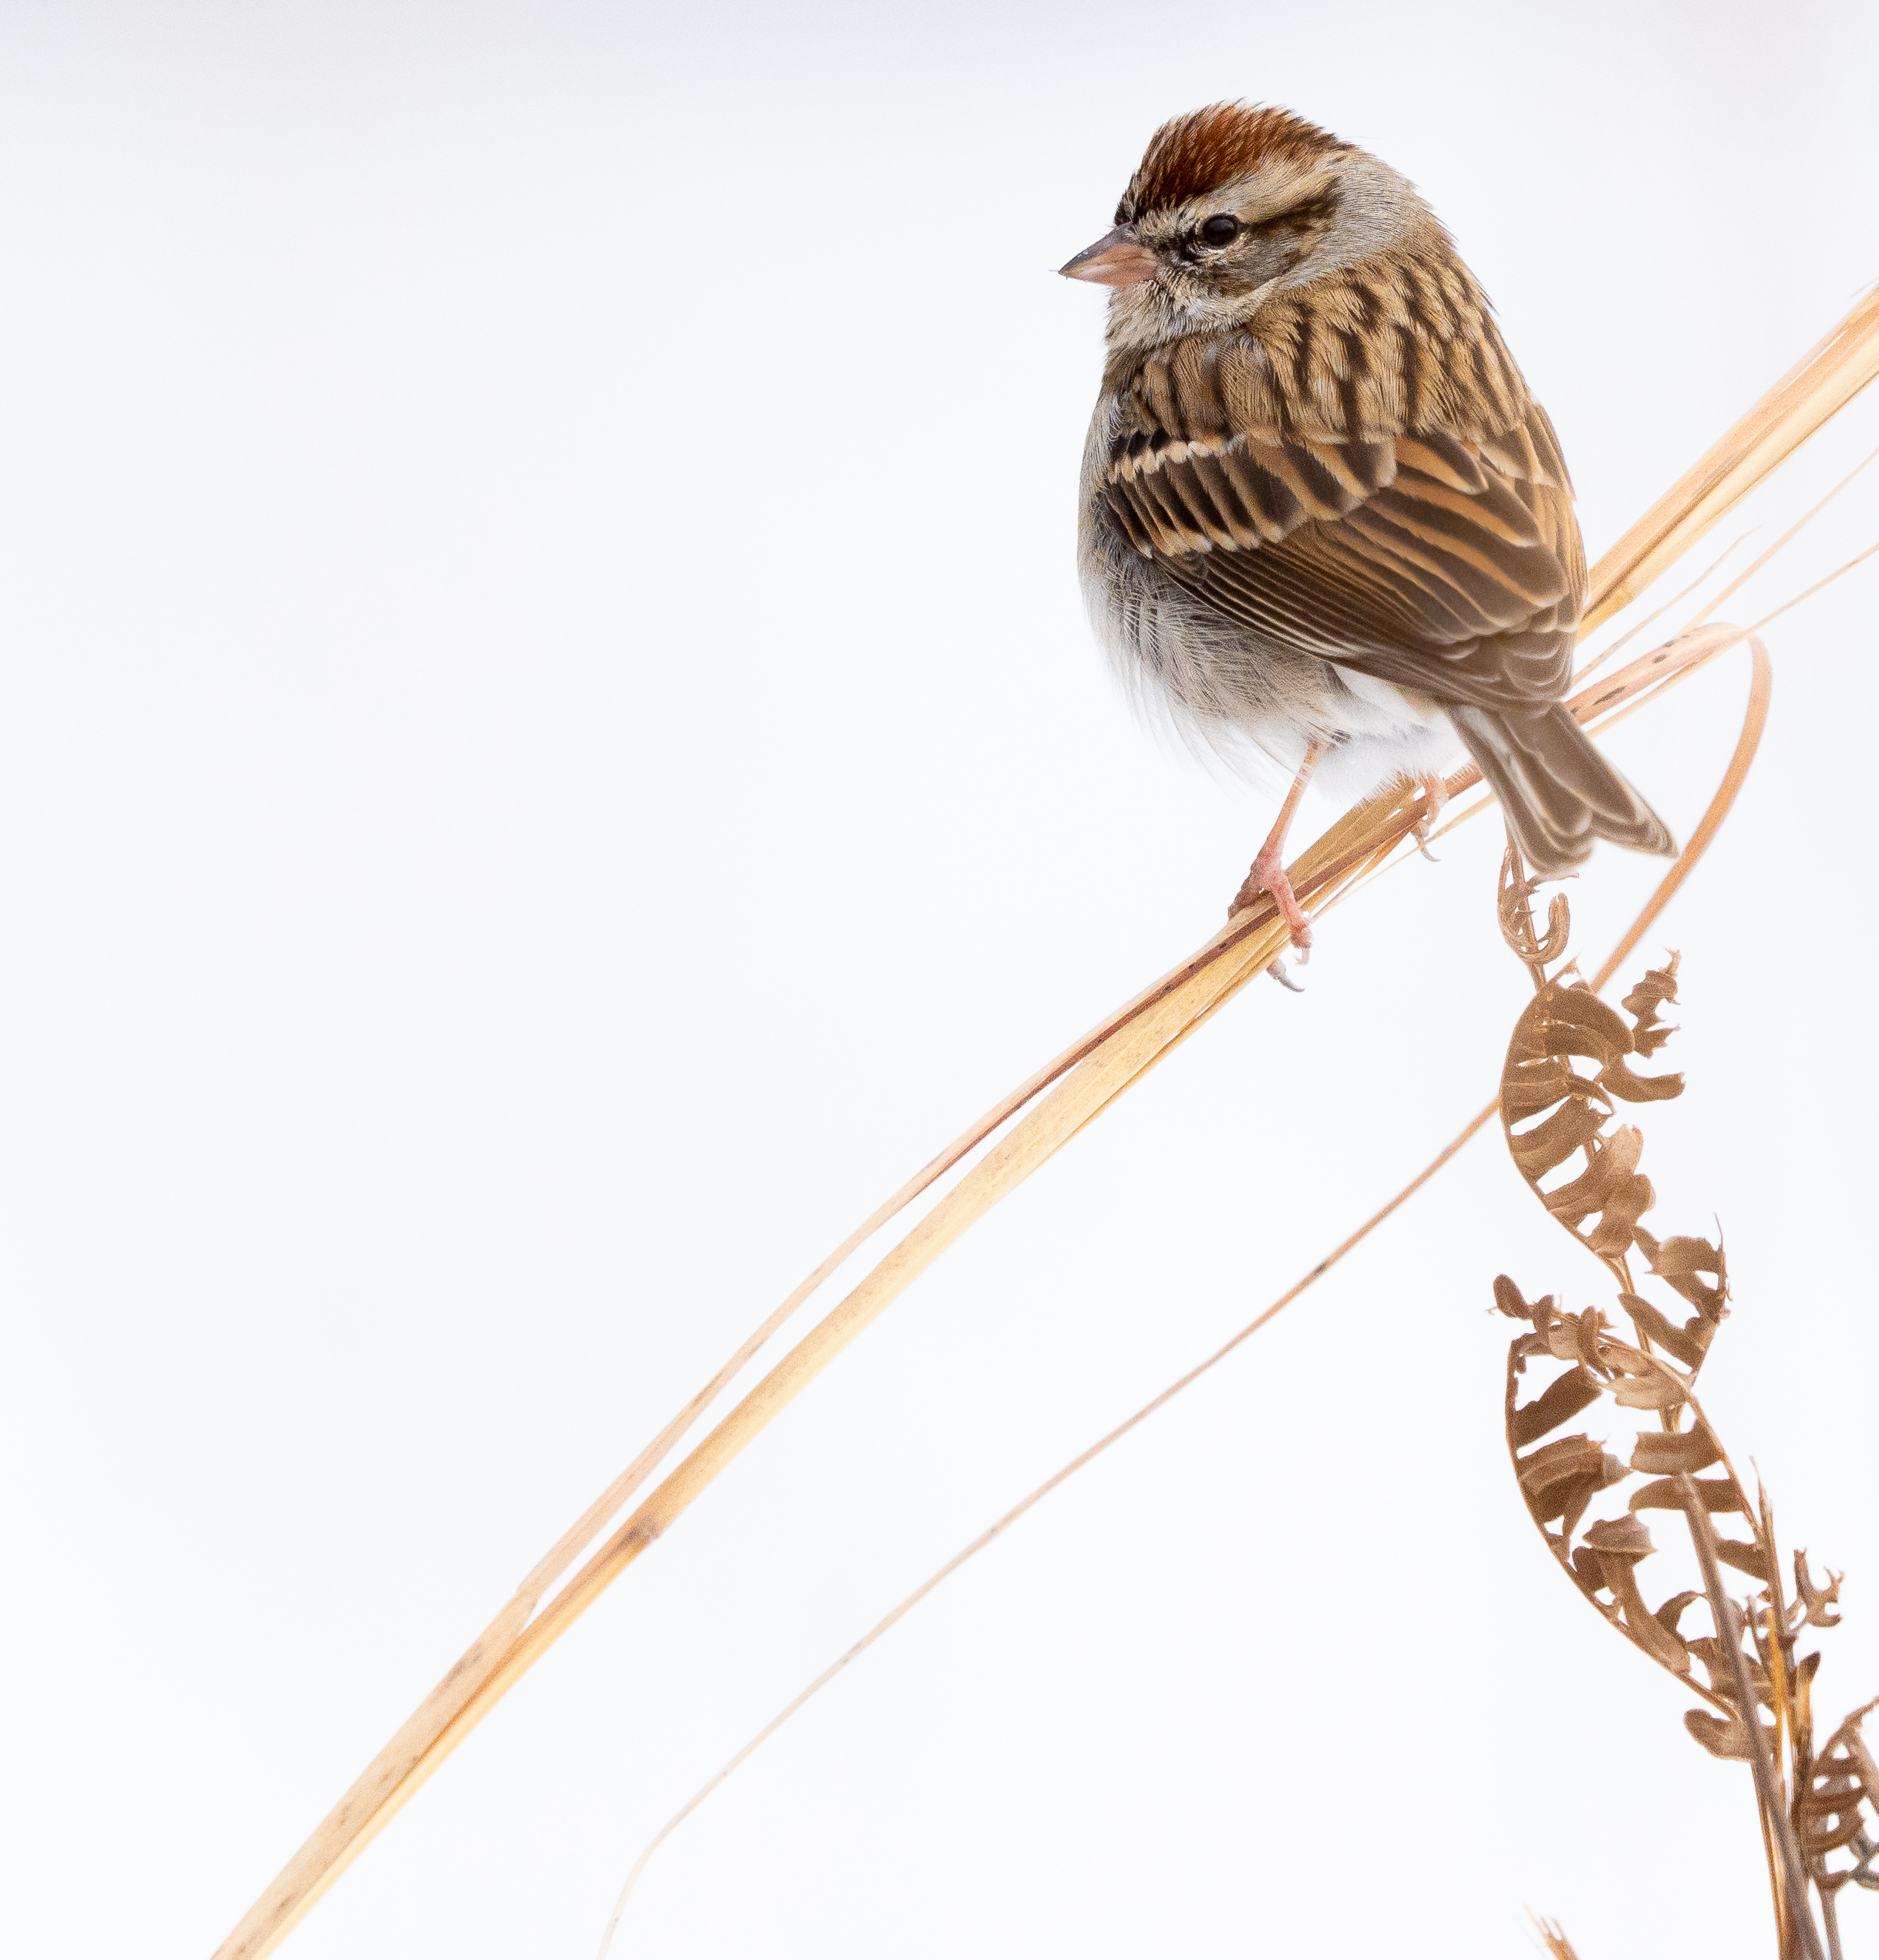 Chipping Sparrow sitting on a blade of grass.